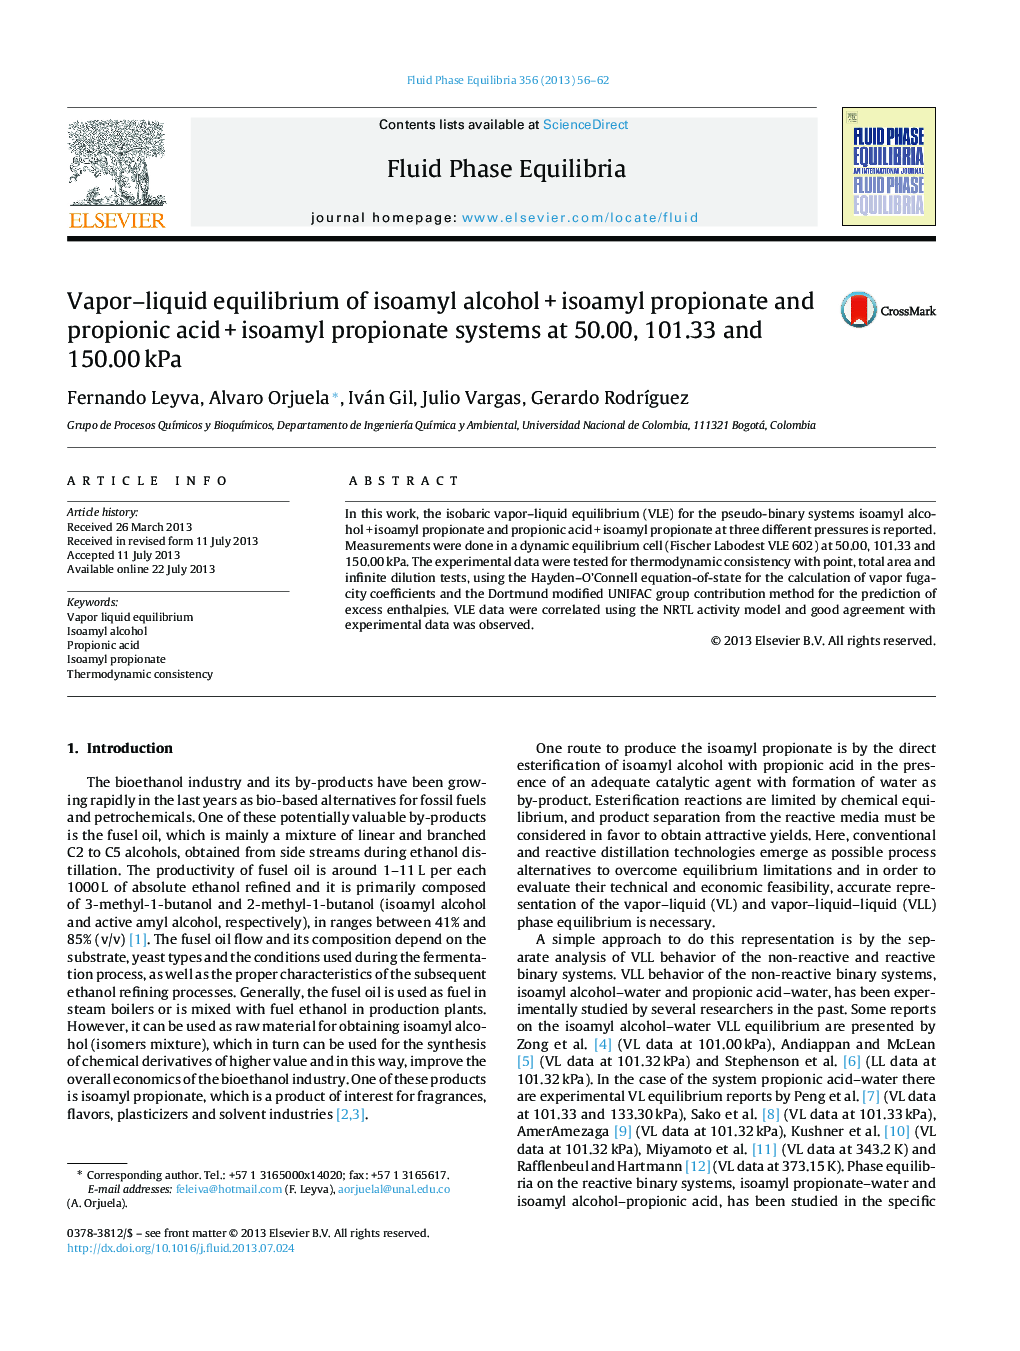 Vapor–liquid equilibrium of isoamyl alcohol + isoamyl propionate and propionic acid + isoamyl propionate systems at 50.00, 101.33 and 150.00 kPa